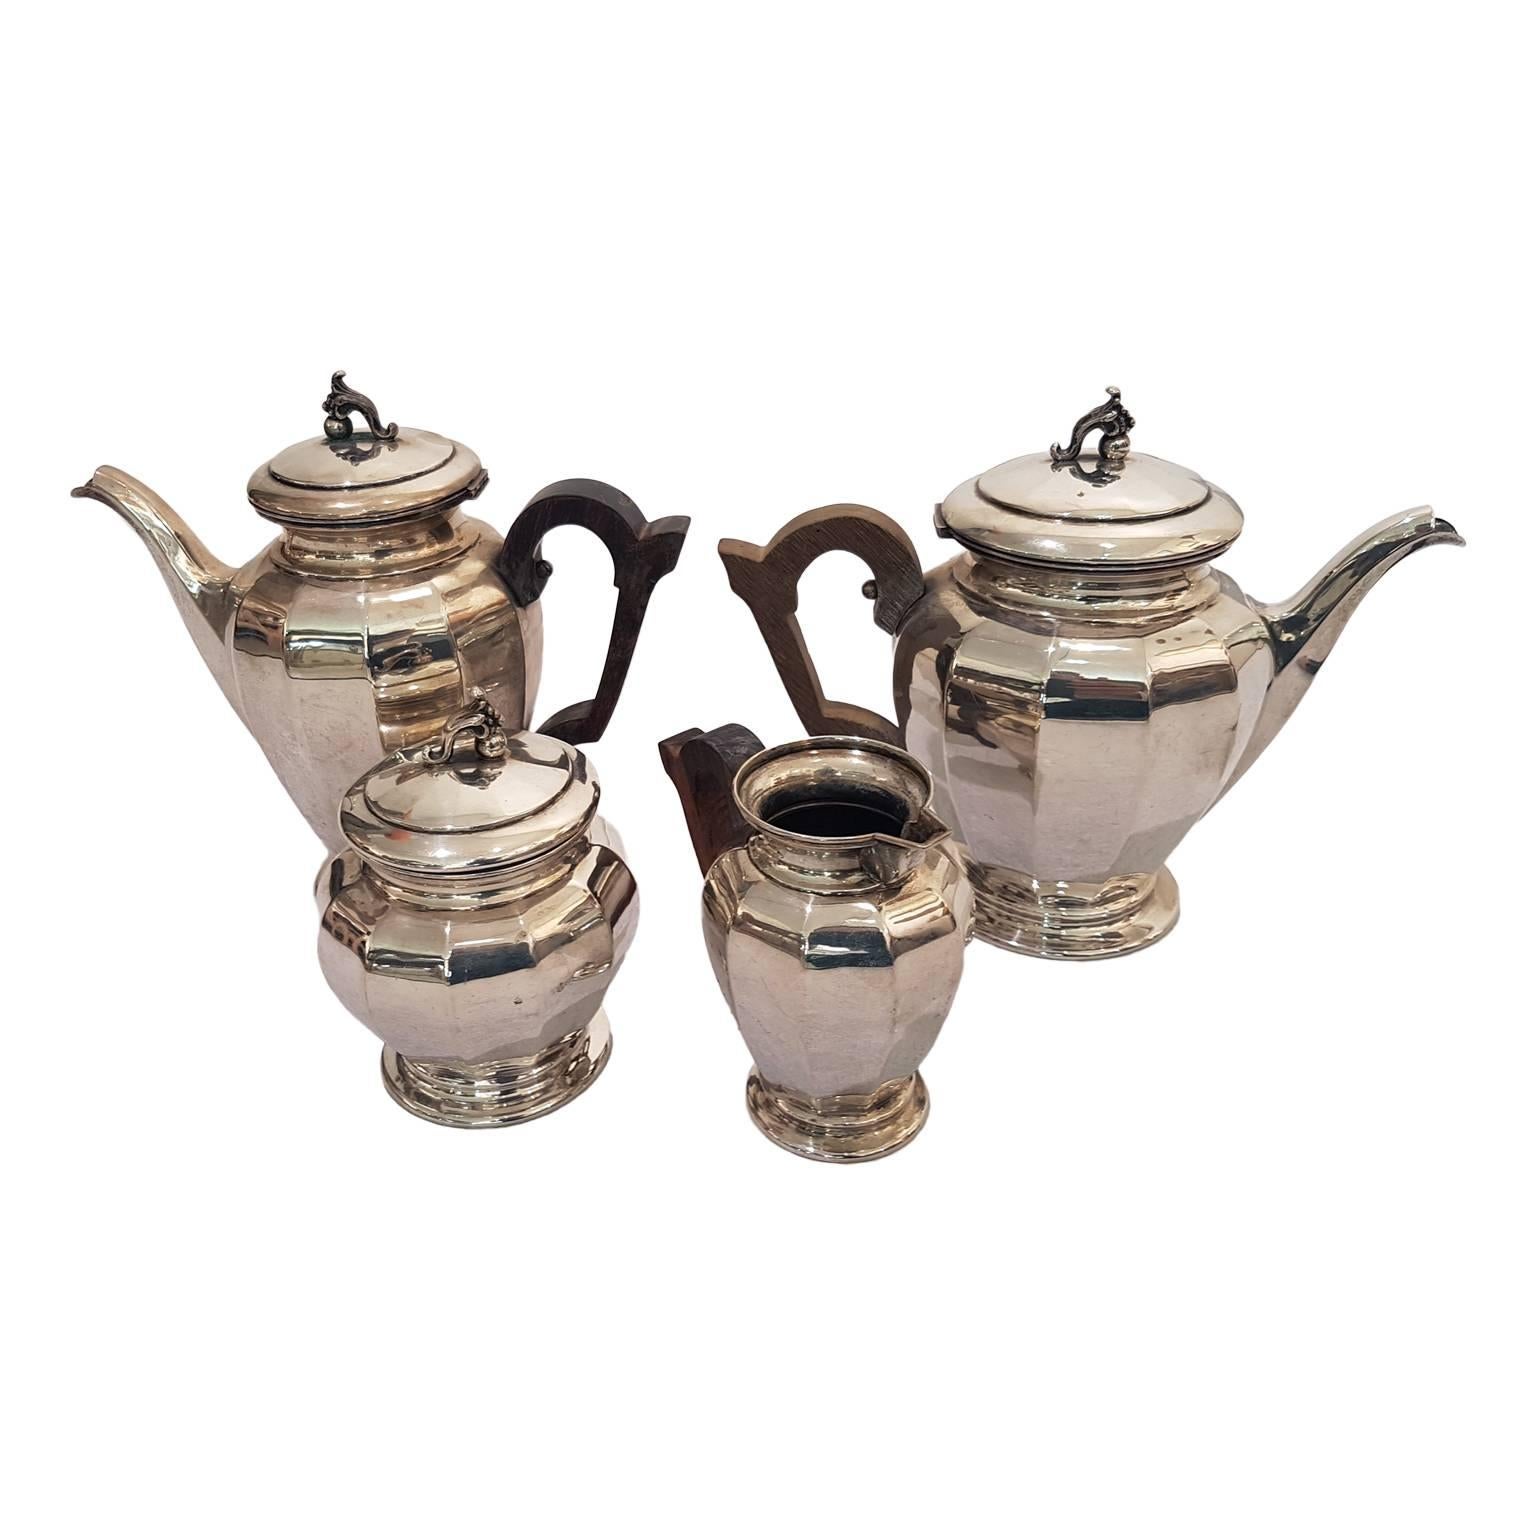 Tea and Coffee Silver Set, Silver 800 by Enrico Messulam for Bolli Milan